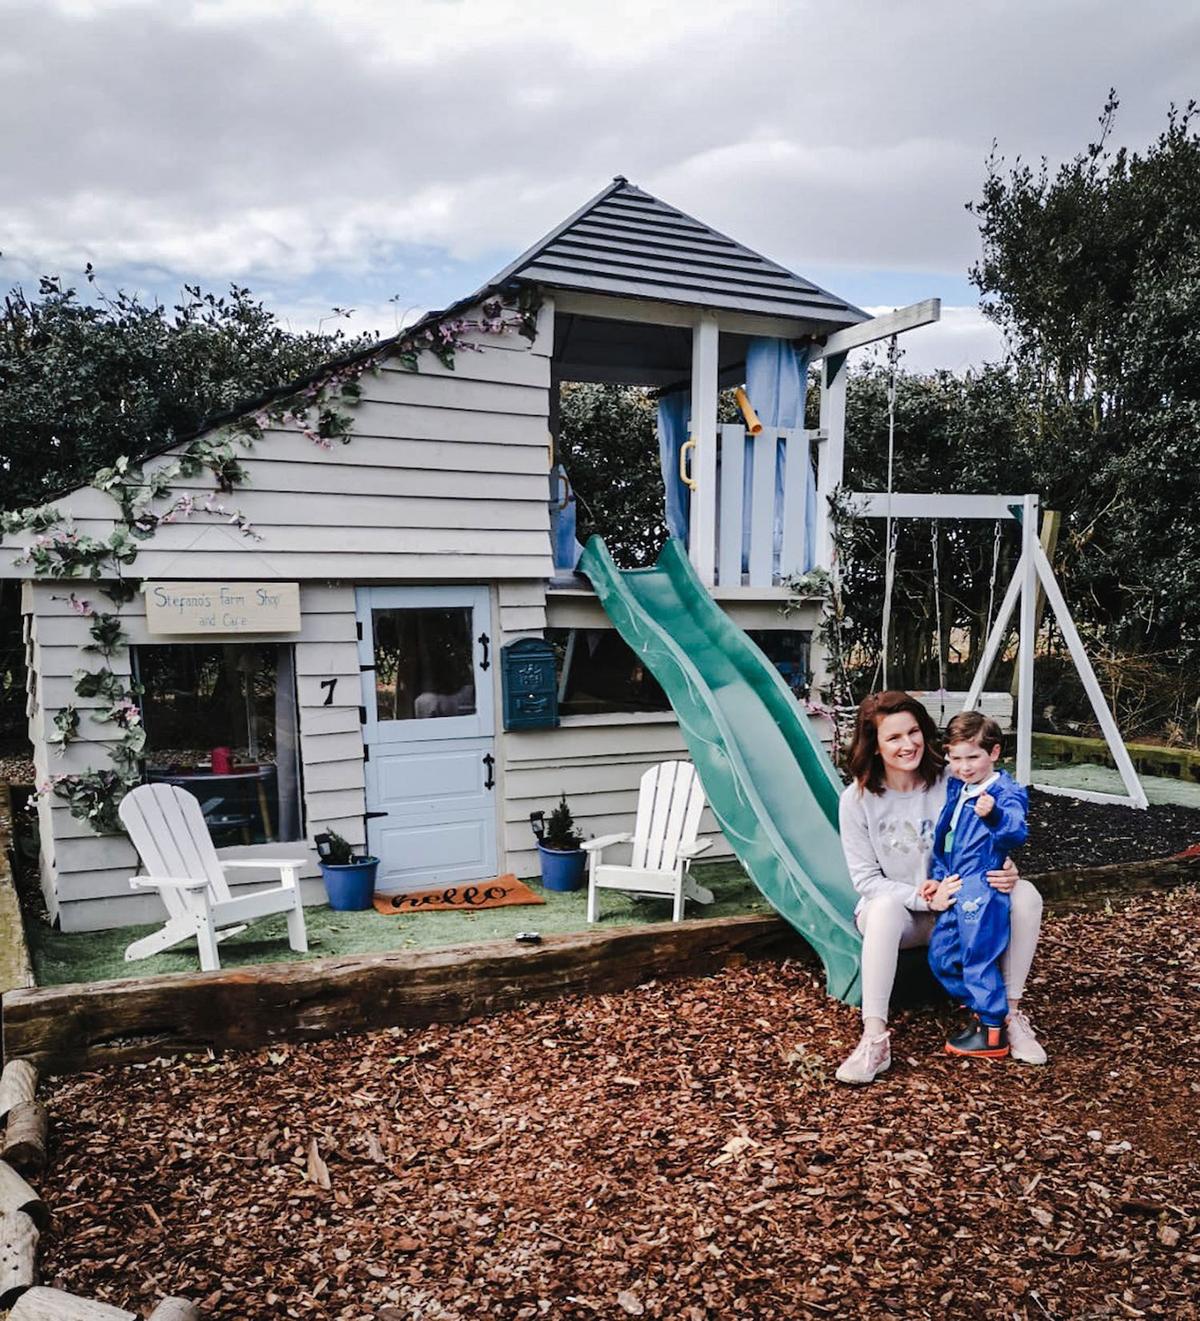 Gemma with her son Stefano outside the playhouse she built. (Courtesy of Caters News)